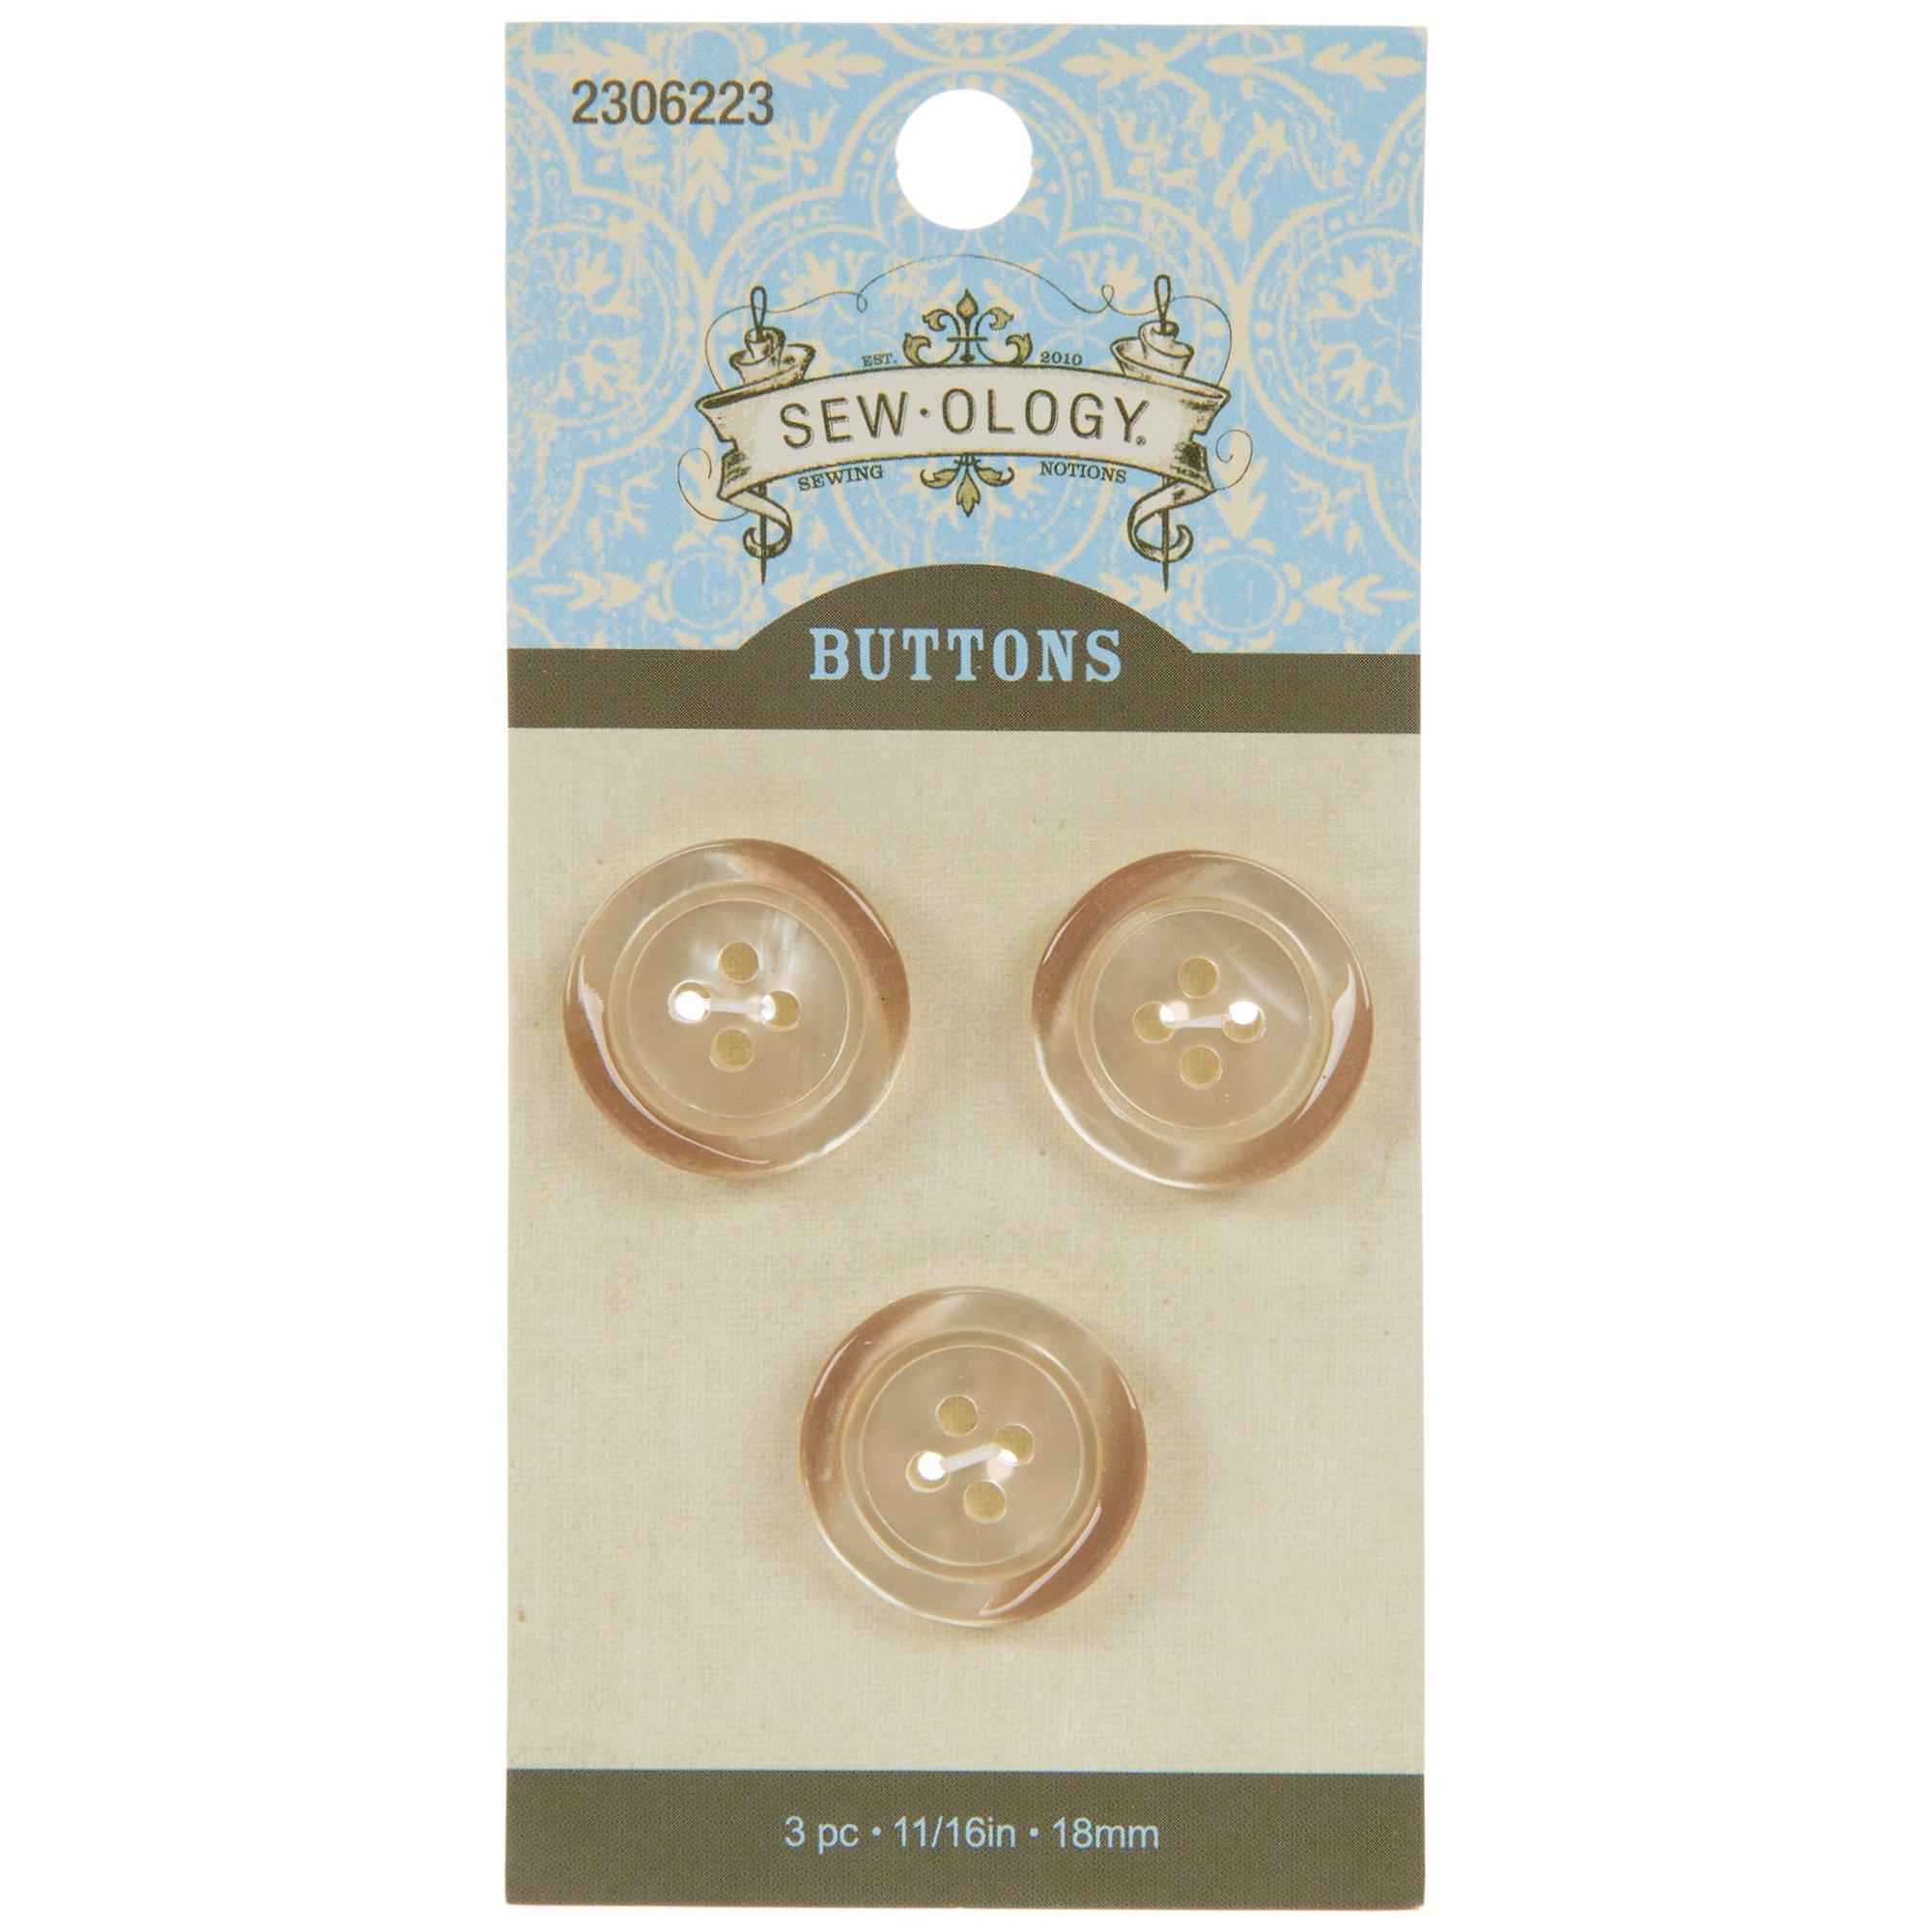 White Round Buttons, Hobby Lobby